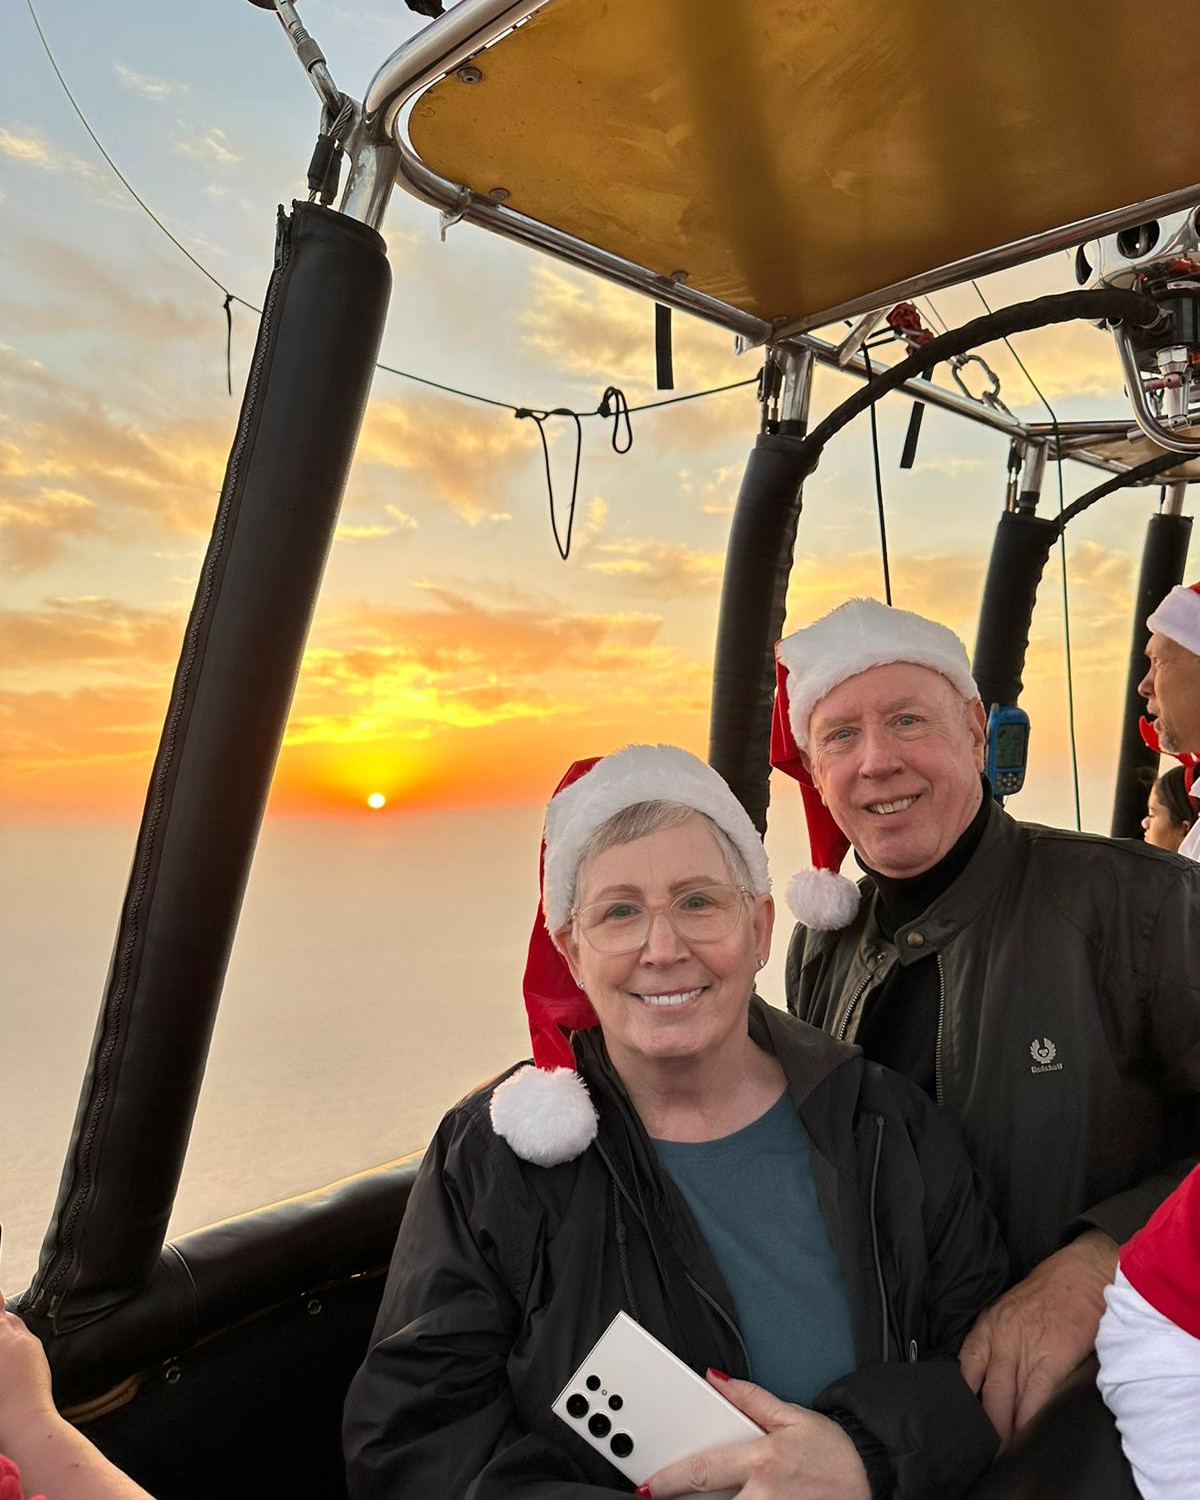 Catching sunrise with loved ones makes travel all the better (1) - Amy Thyberg